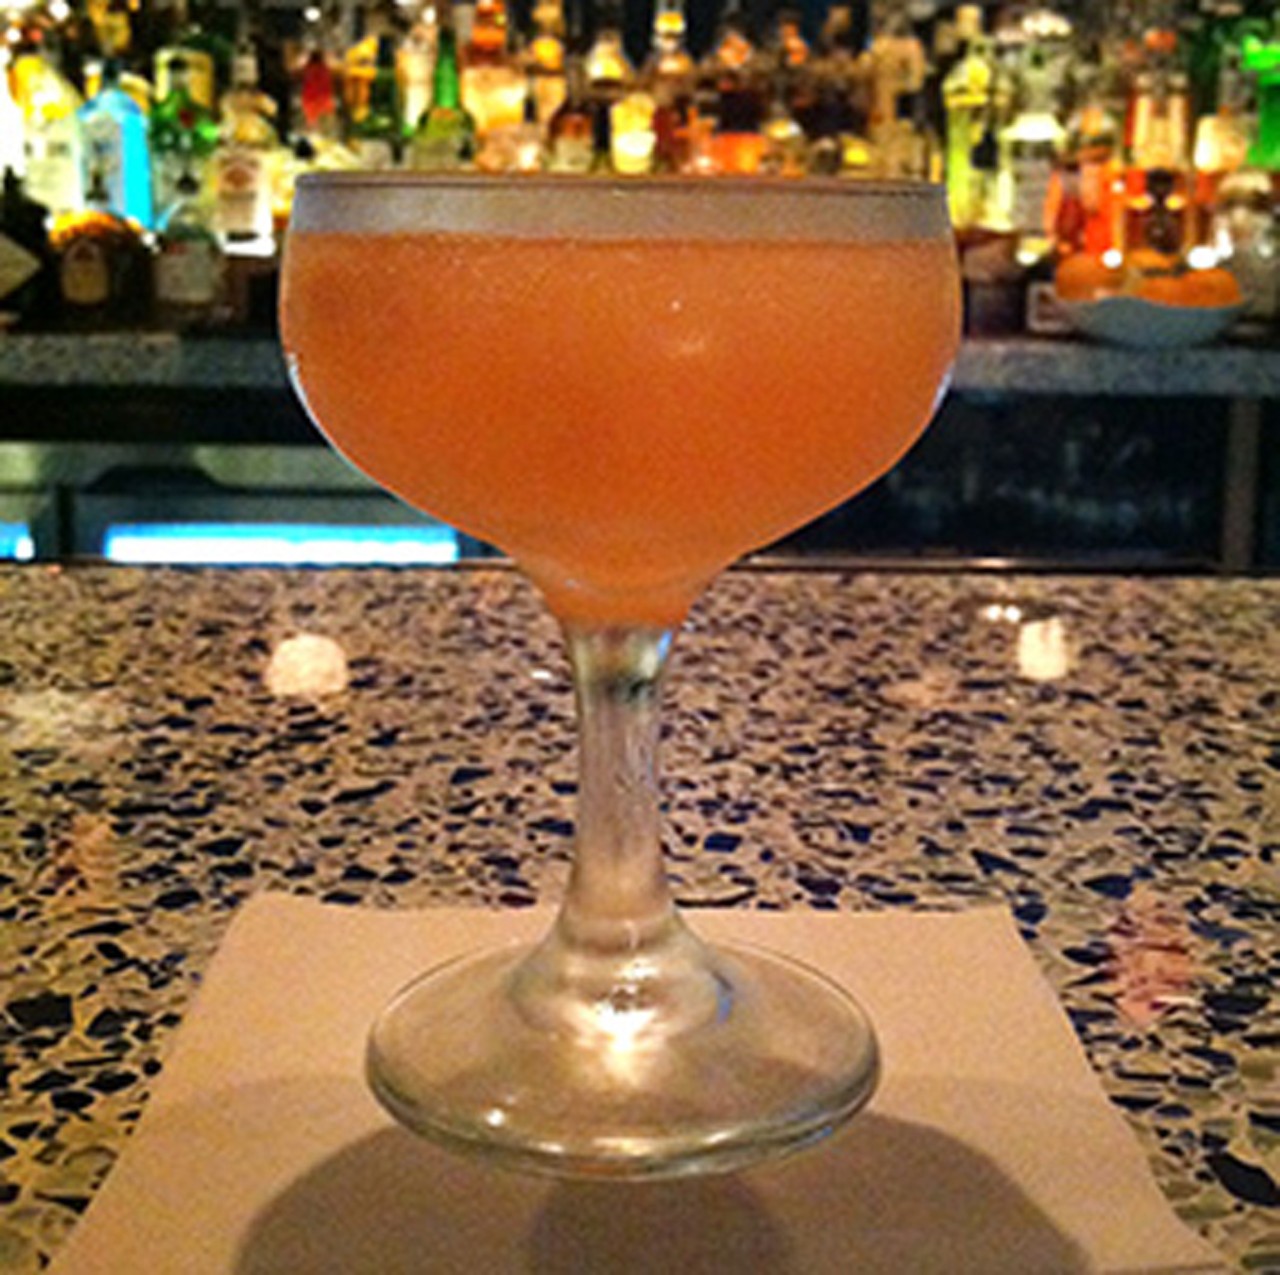 Grapefruit and tequila make up the New Moon Room's "Sidewinder".